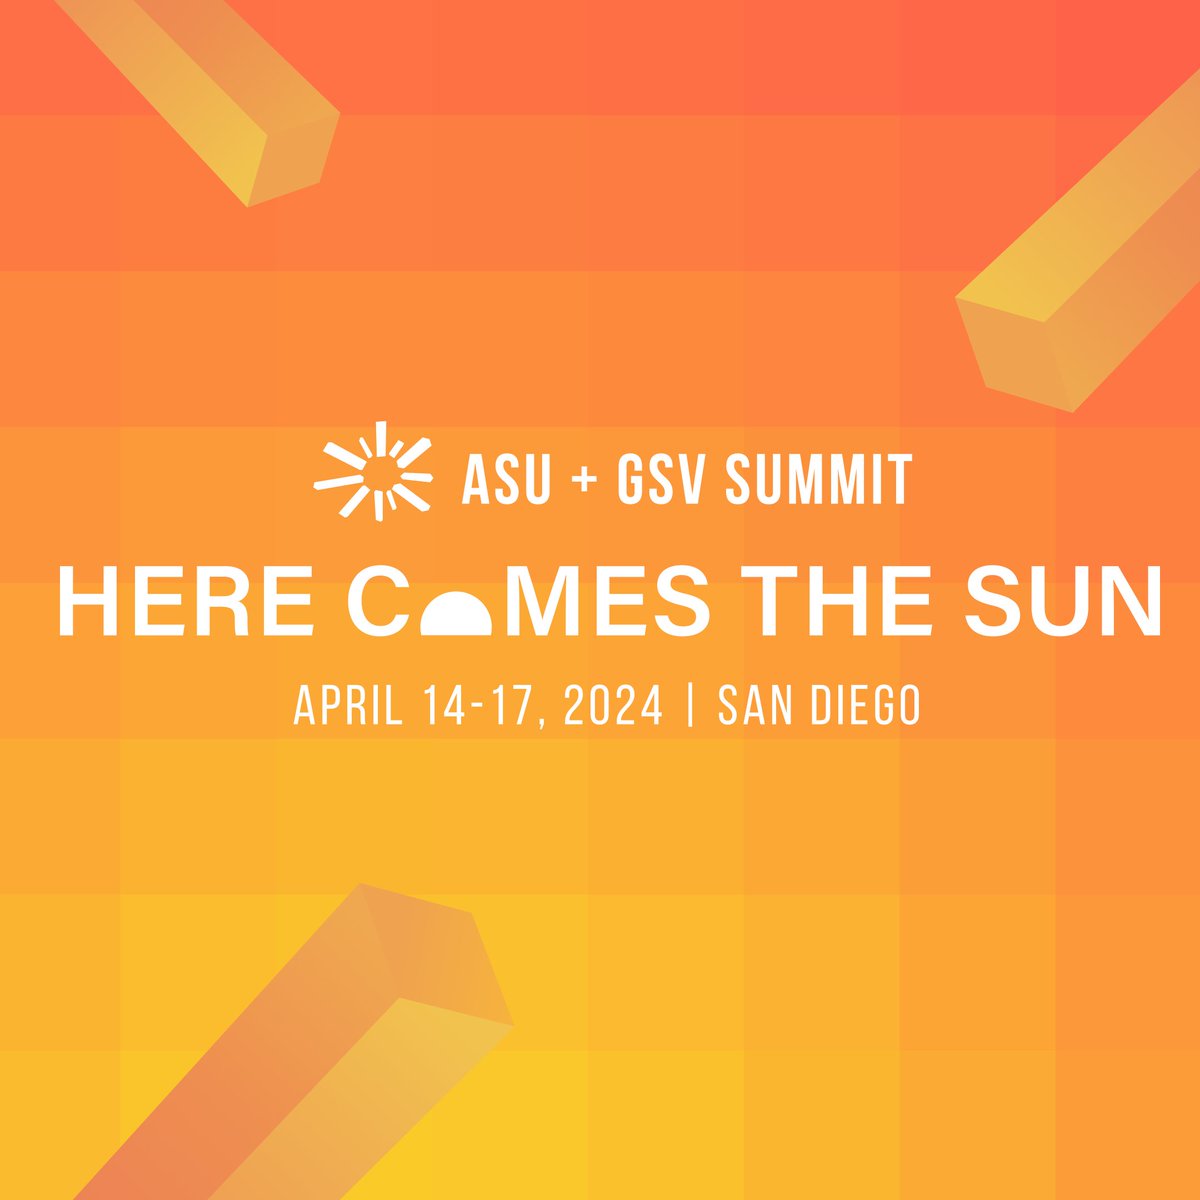 The ASU + GSV 2024 Summit starts April 15 in San Diego & we’re so excited for @NatUniv & the Academics at NU to be an event sponsor. Stop by Booth #243 to be part of an exceptional community of educators, entrepreneurs, & innovators who are reshaping the future of education.